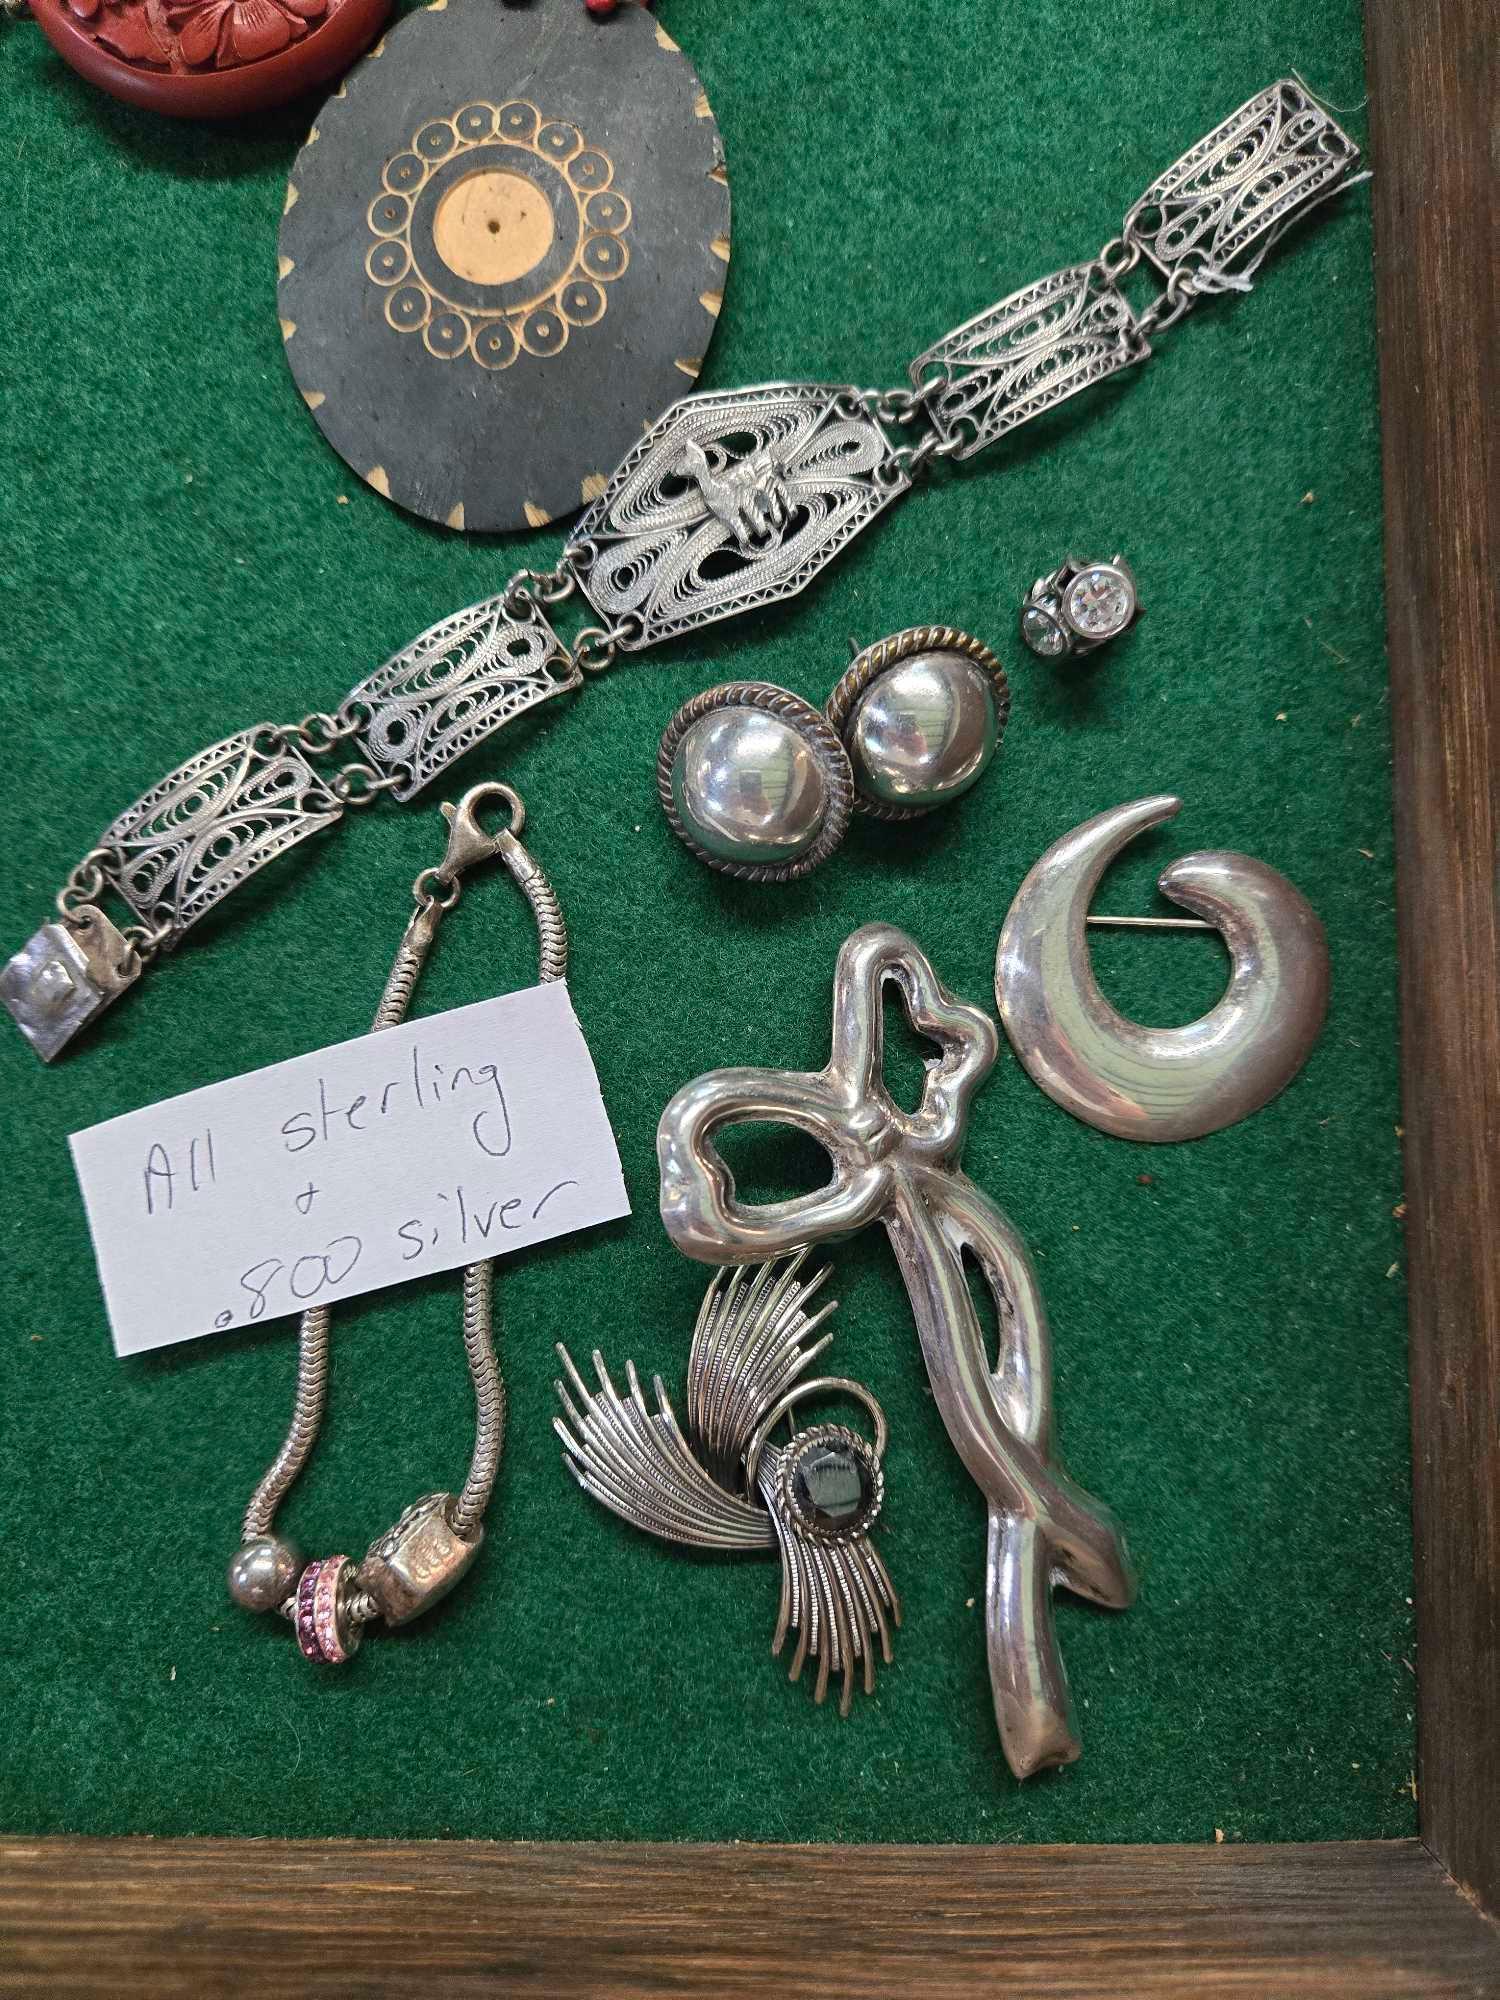 Case Lot of Estate Jewelry Incl. Sterling Silver